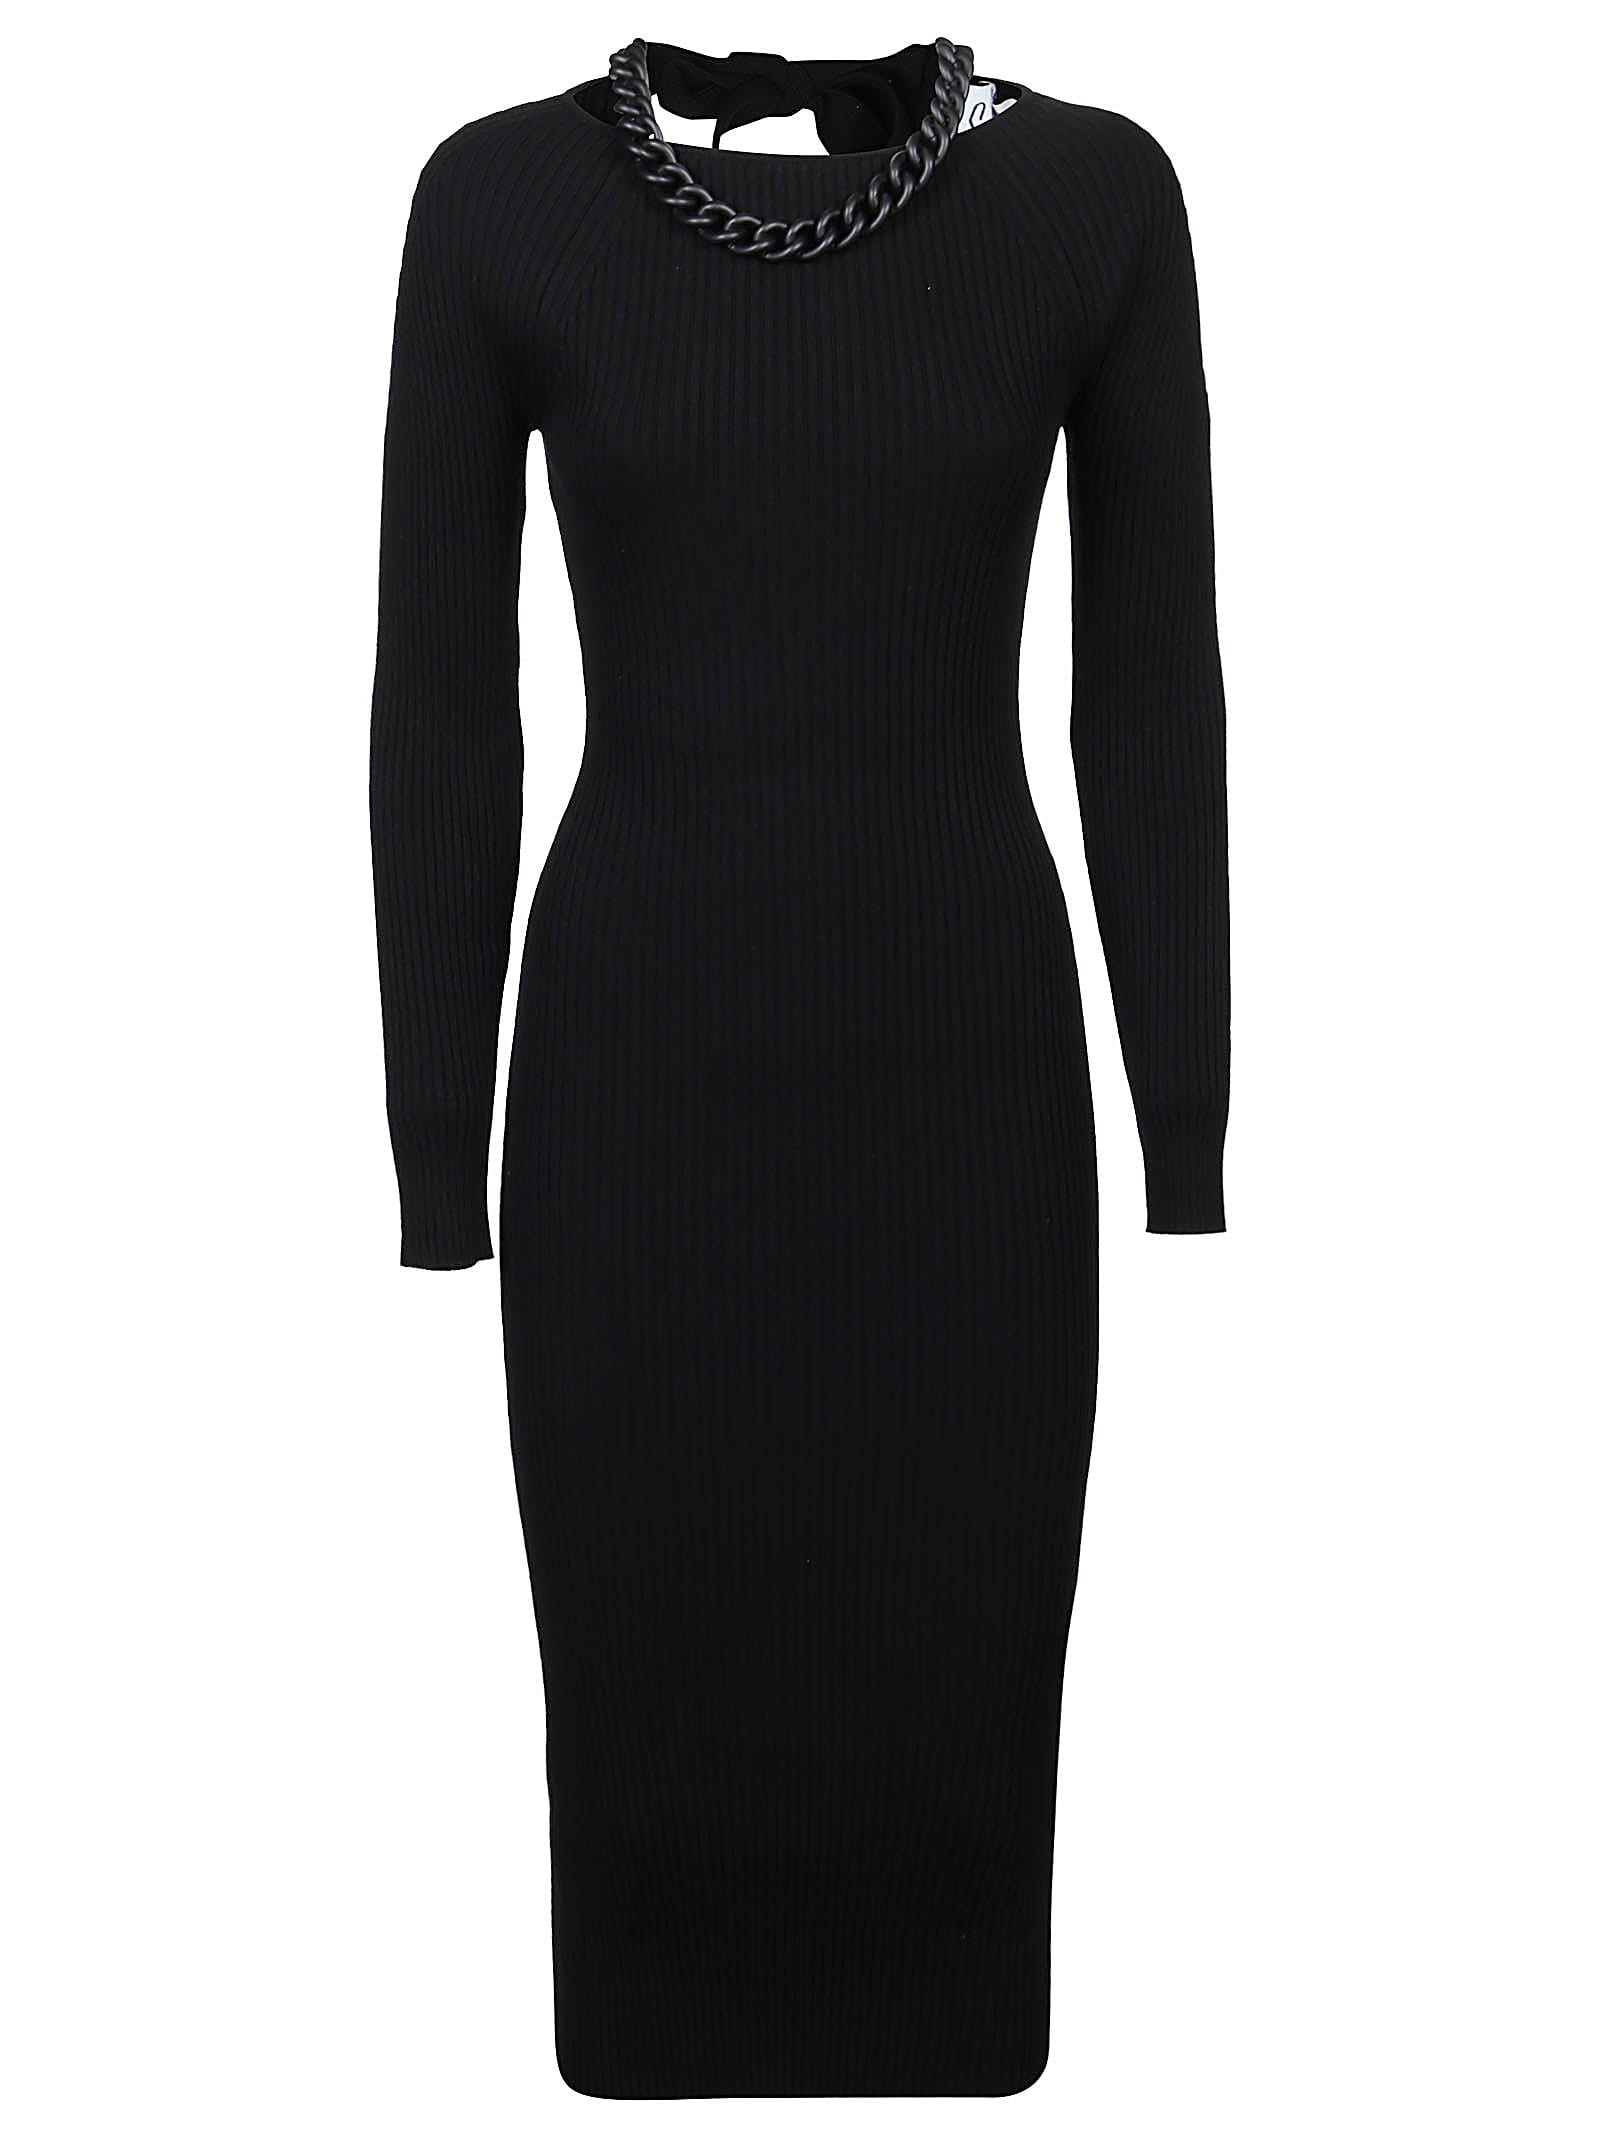 Giuseppe di Morabito Knitted Dress With Chain Details